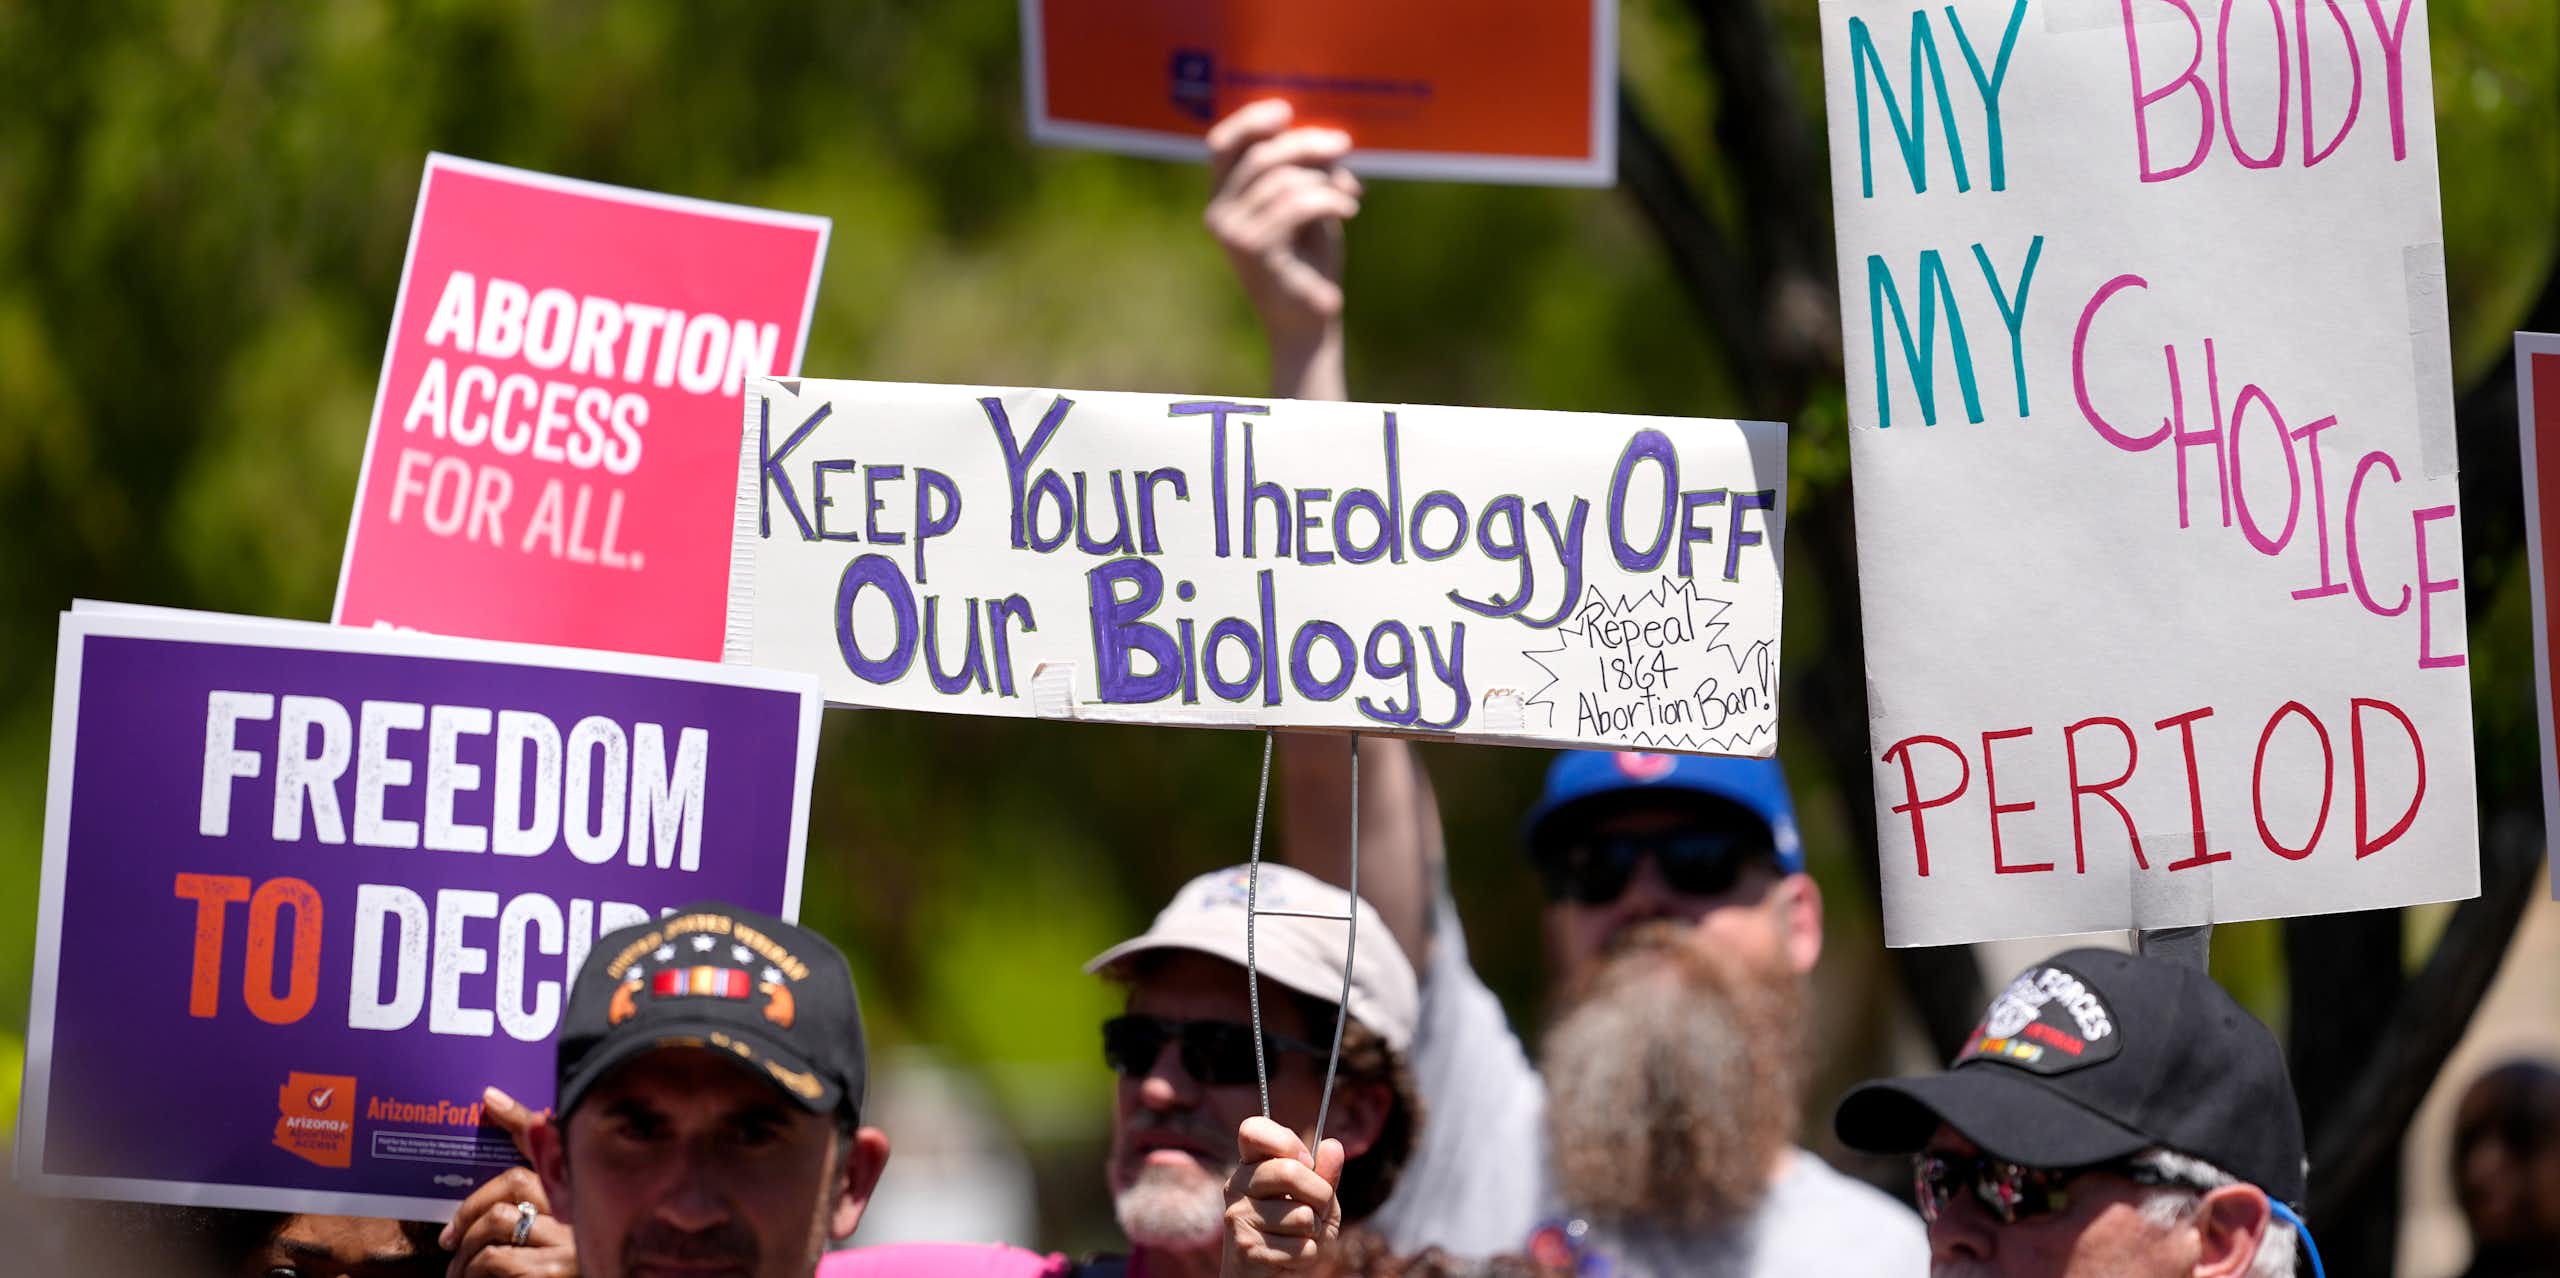 Abortion rights supporters hold up signs of protest against the Arizona abortion ban.